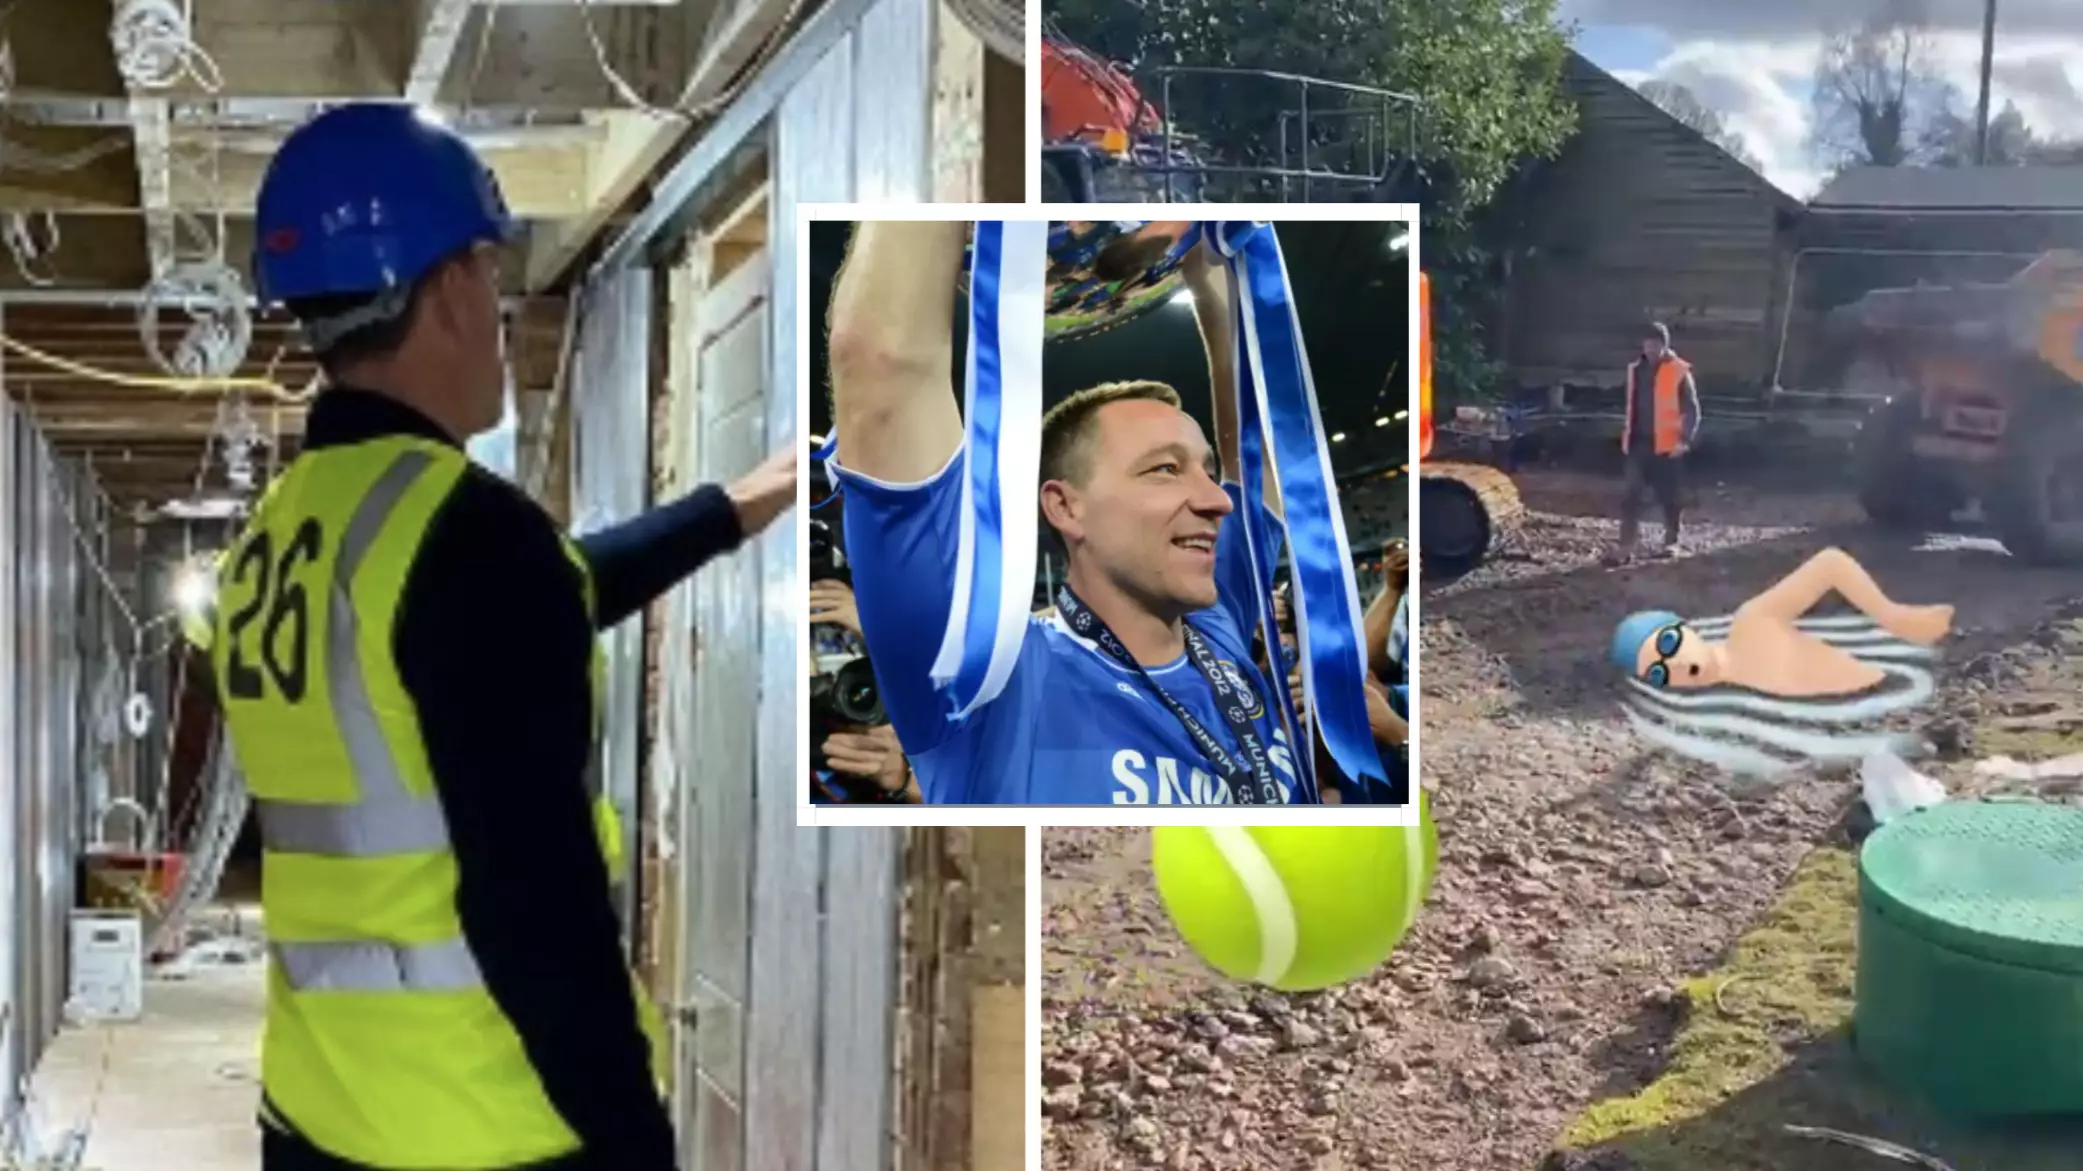 John Terry Showed Fans Around His House Development In Hi-Vis Jacket With Squad Number